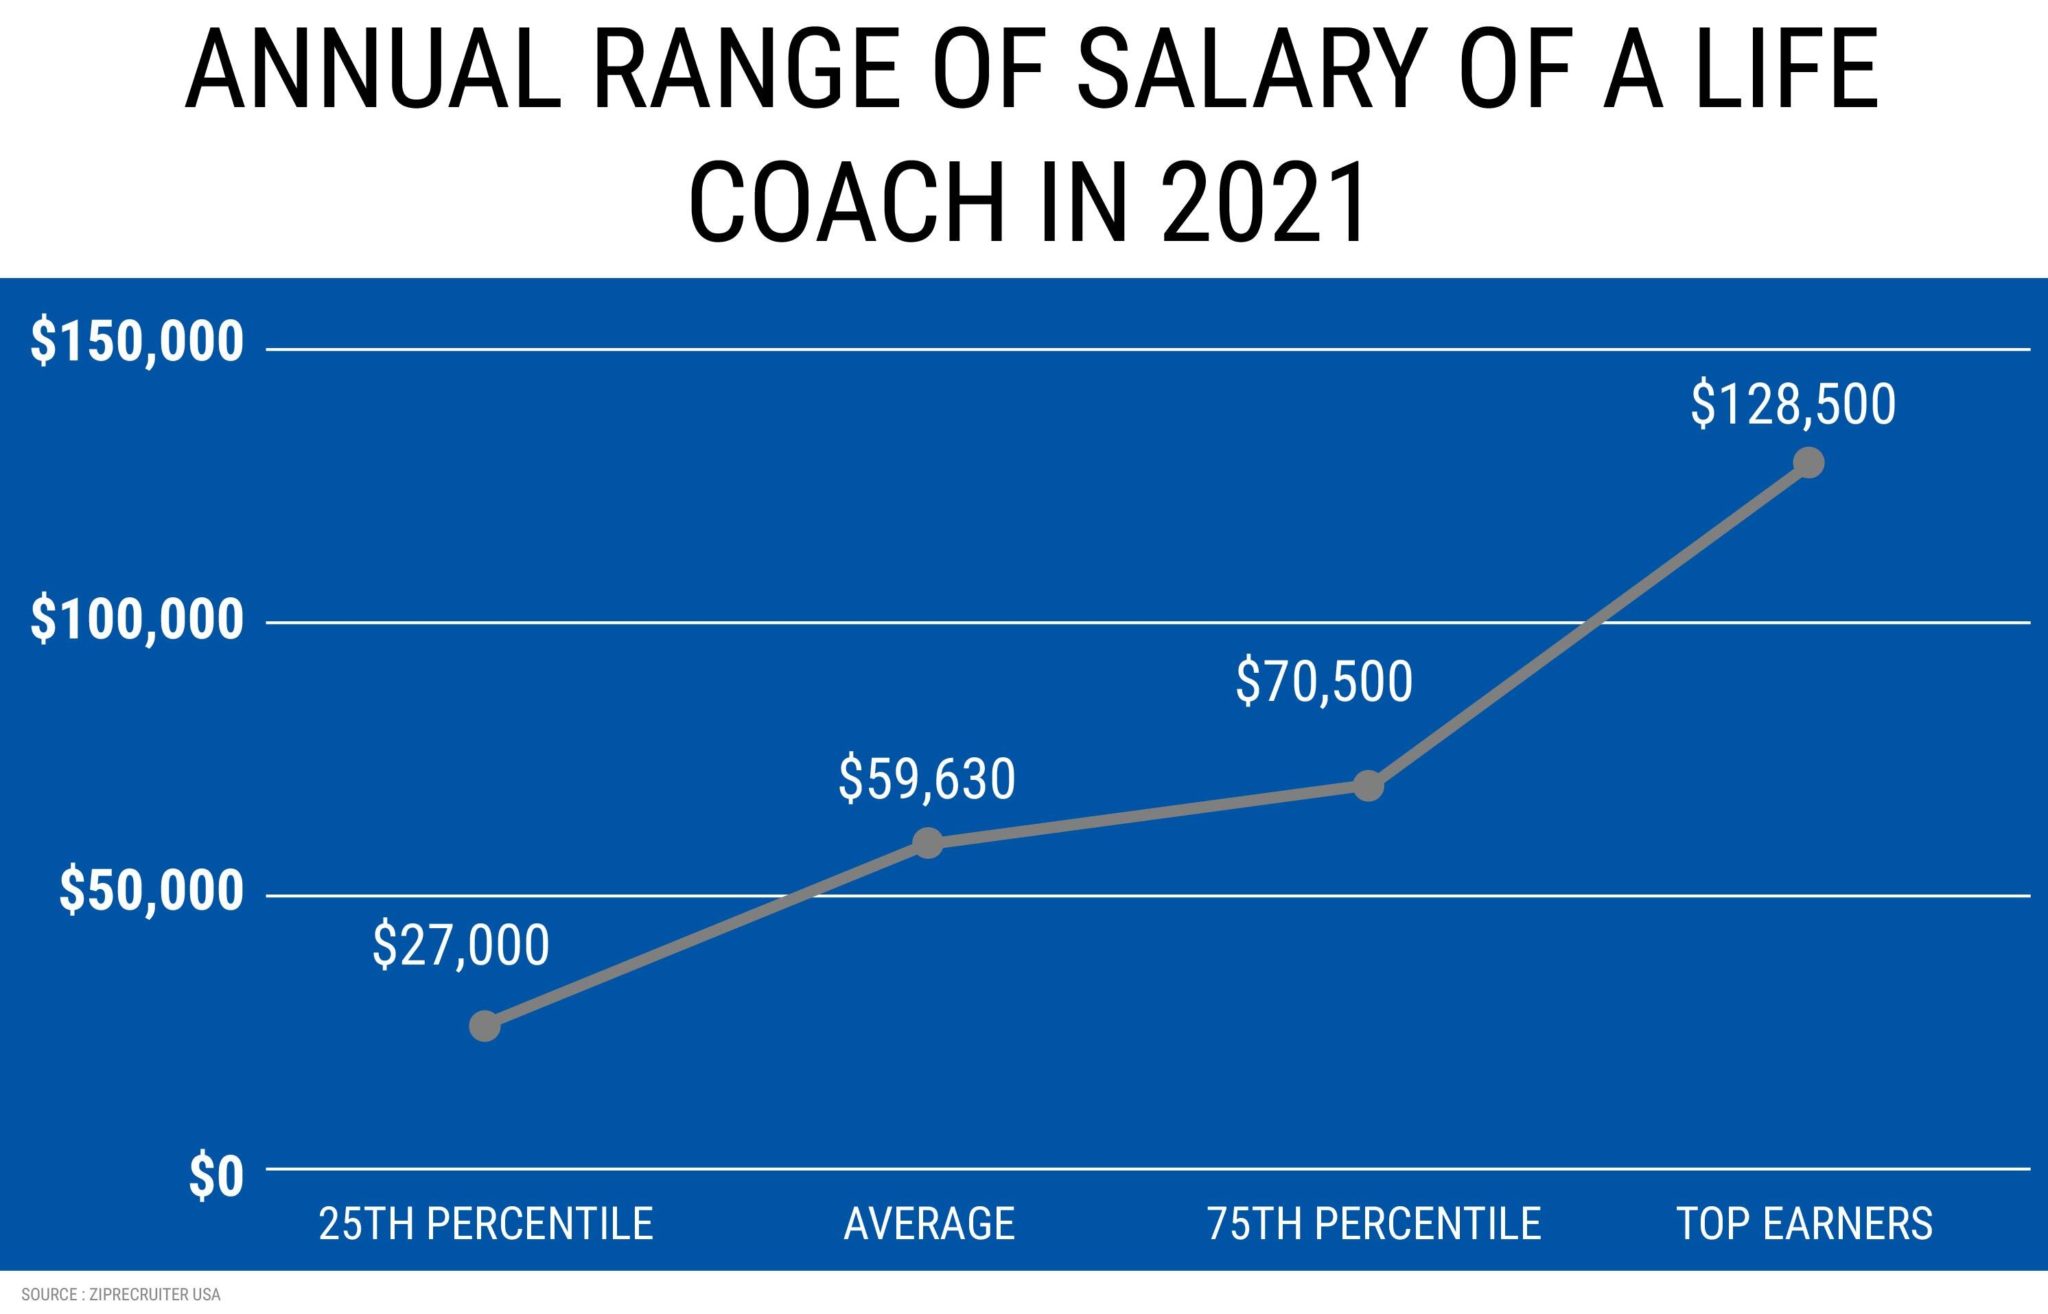 ANNUAL RANGE OF SALARY OF A LIFE COACH IN 2021